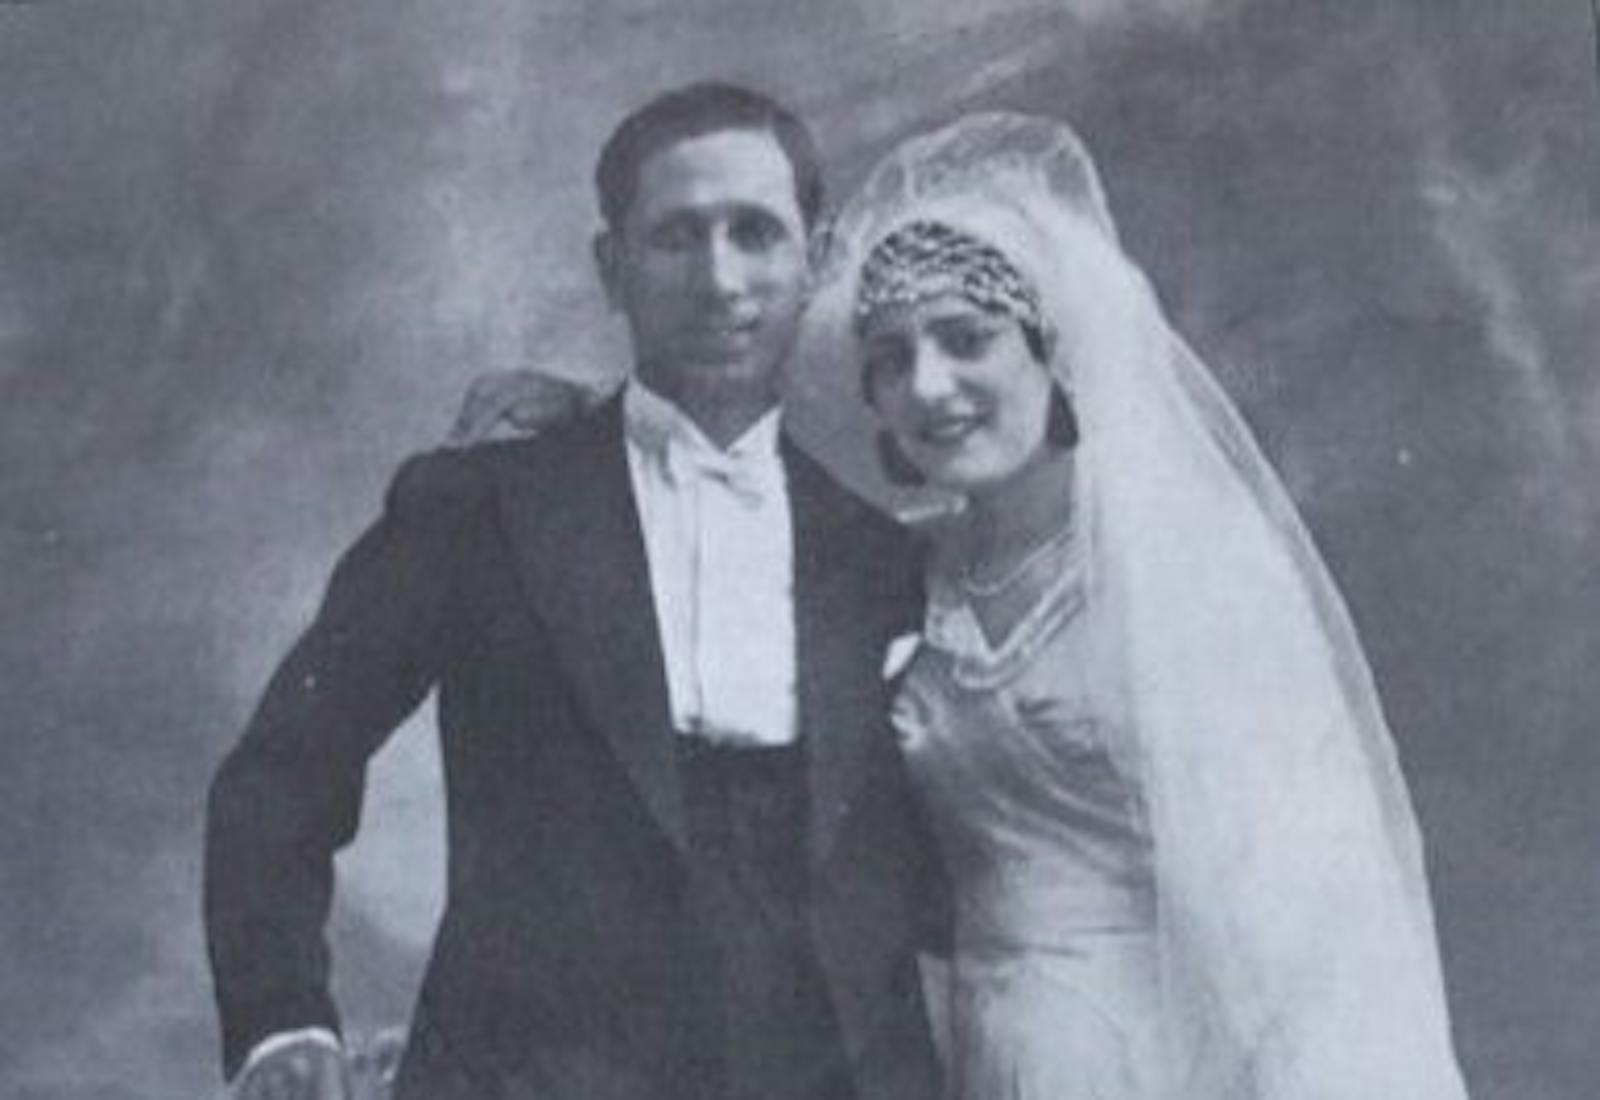 Eva’s  grandfather Nathan (left) and grandmother Henriette (right) at their wedding  in Tunisia in the 1940s.